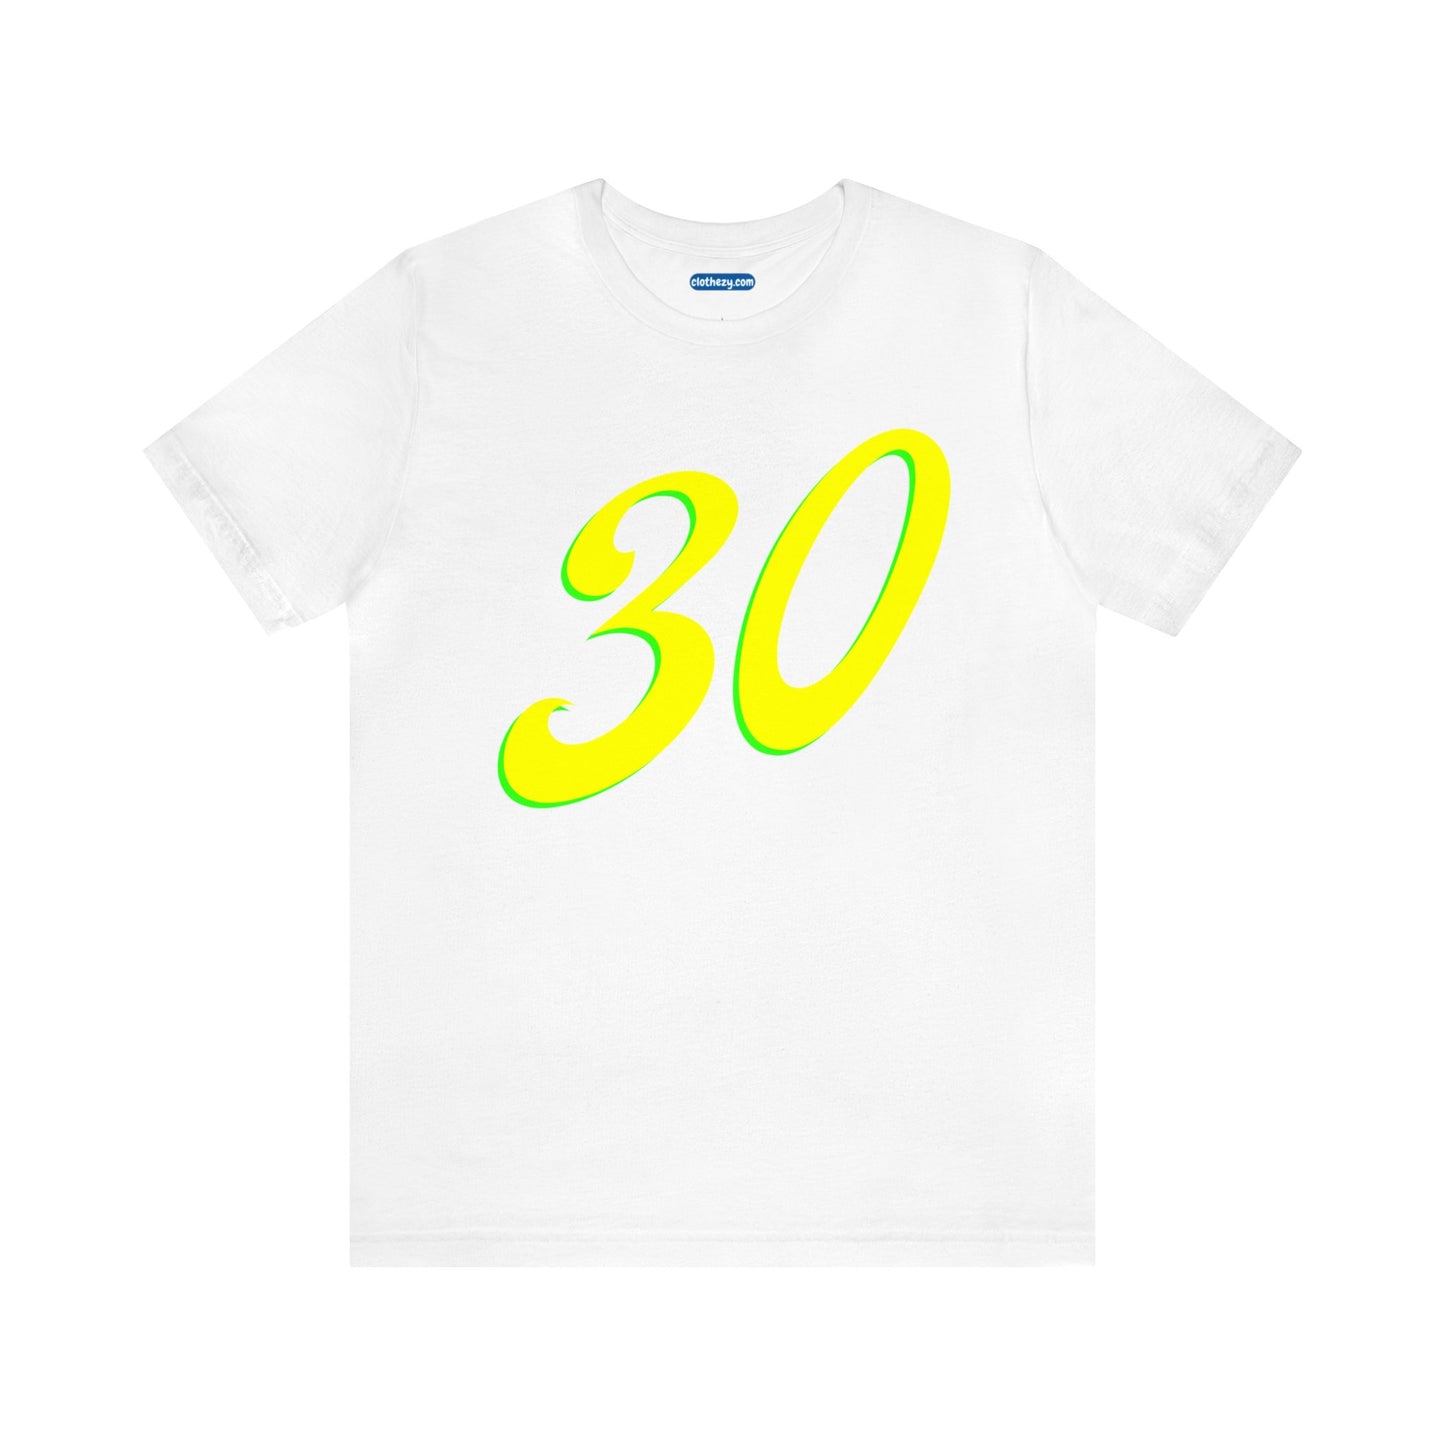 Number 30 Design - Soft Cotton Tee for birthdays and celebrations, Gift for friends and family, Multiple Options by clothezy.com in White Size Small - Buy Now